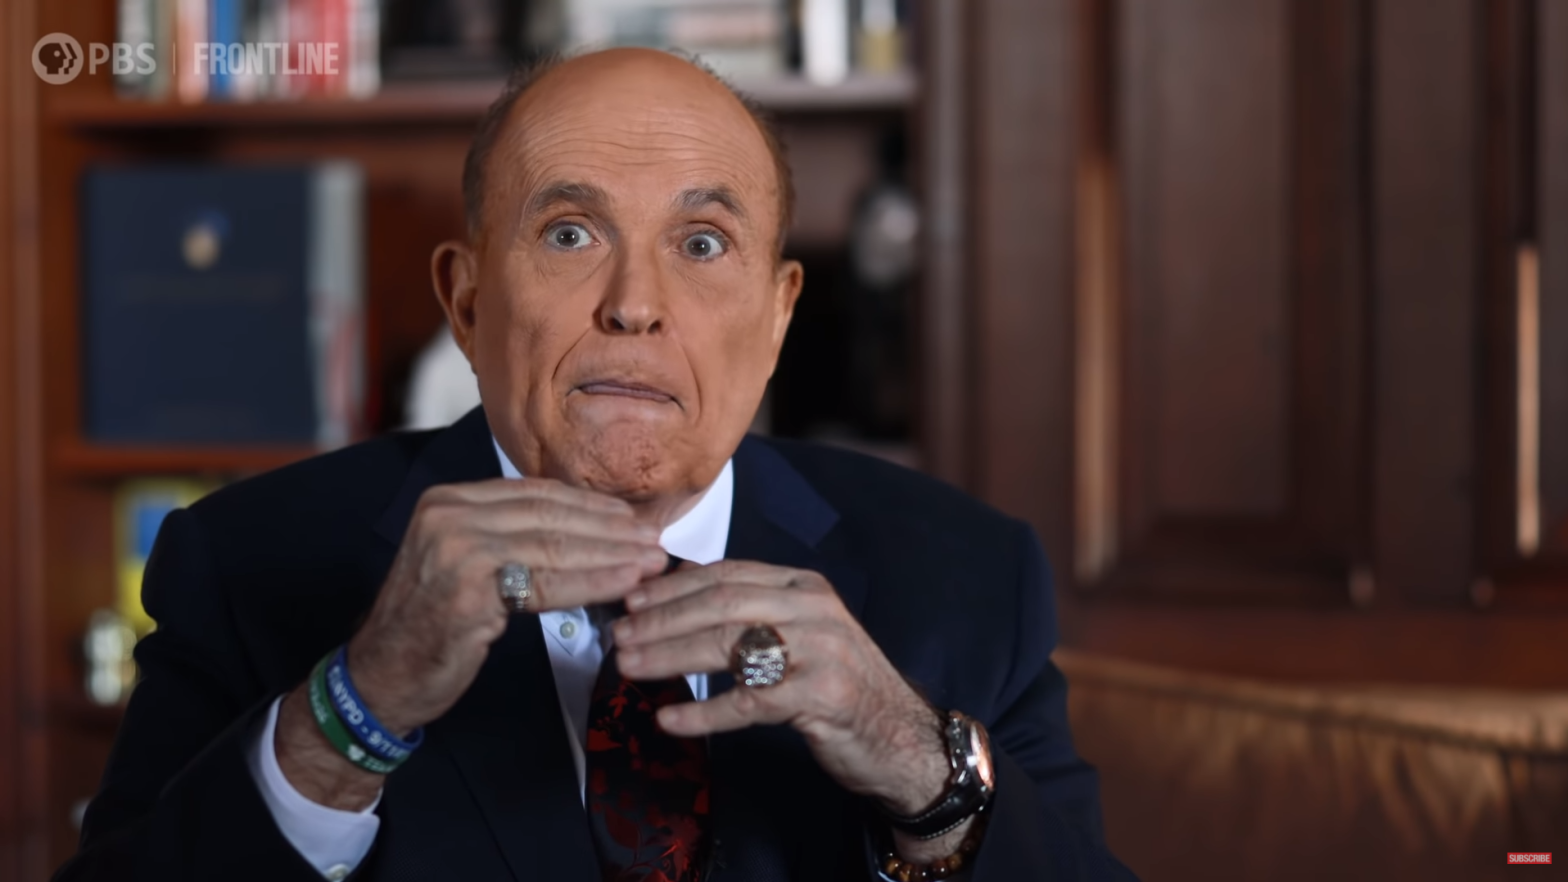 Rudy Giuliani (seen here with corpse hands). (Screenshot: Frontline/PBS, Other)